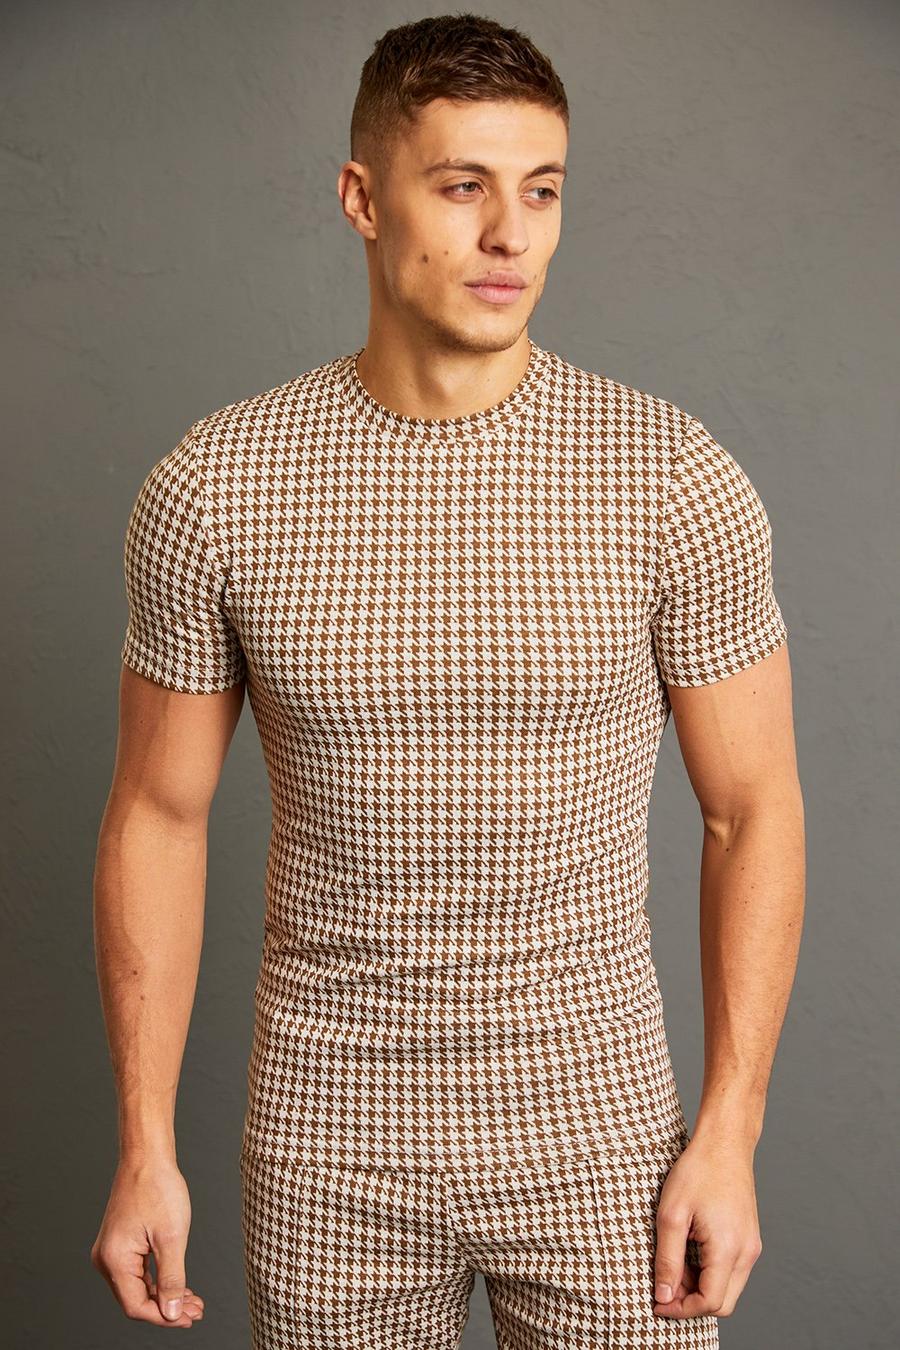 Chocolate brun Muscle Fit Houndstooth Jacquard T-shirt